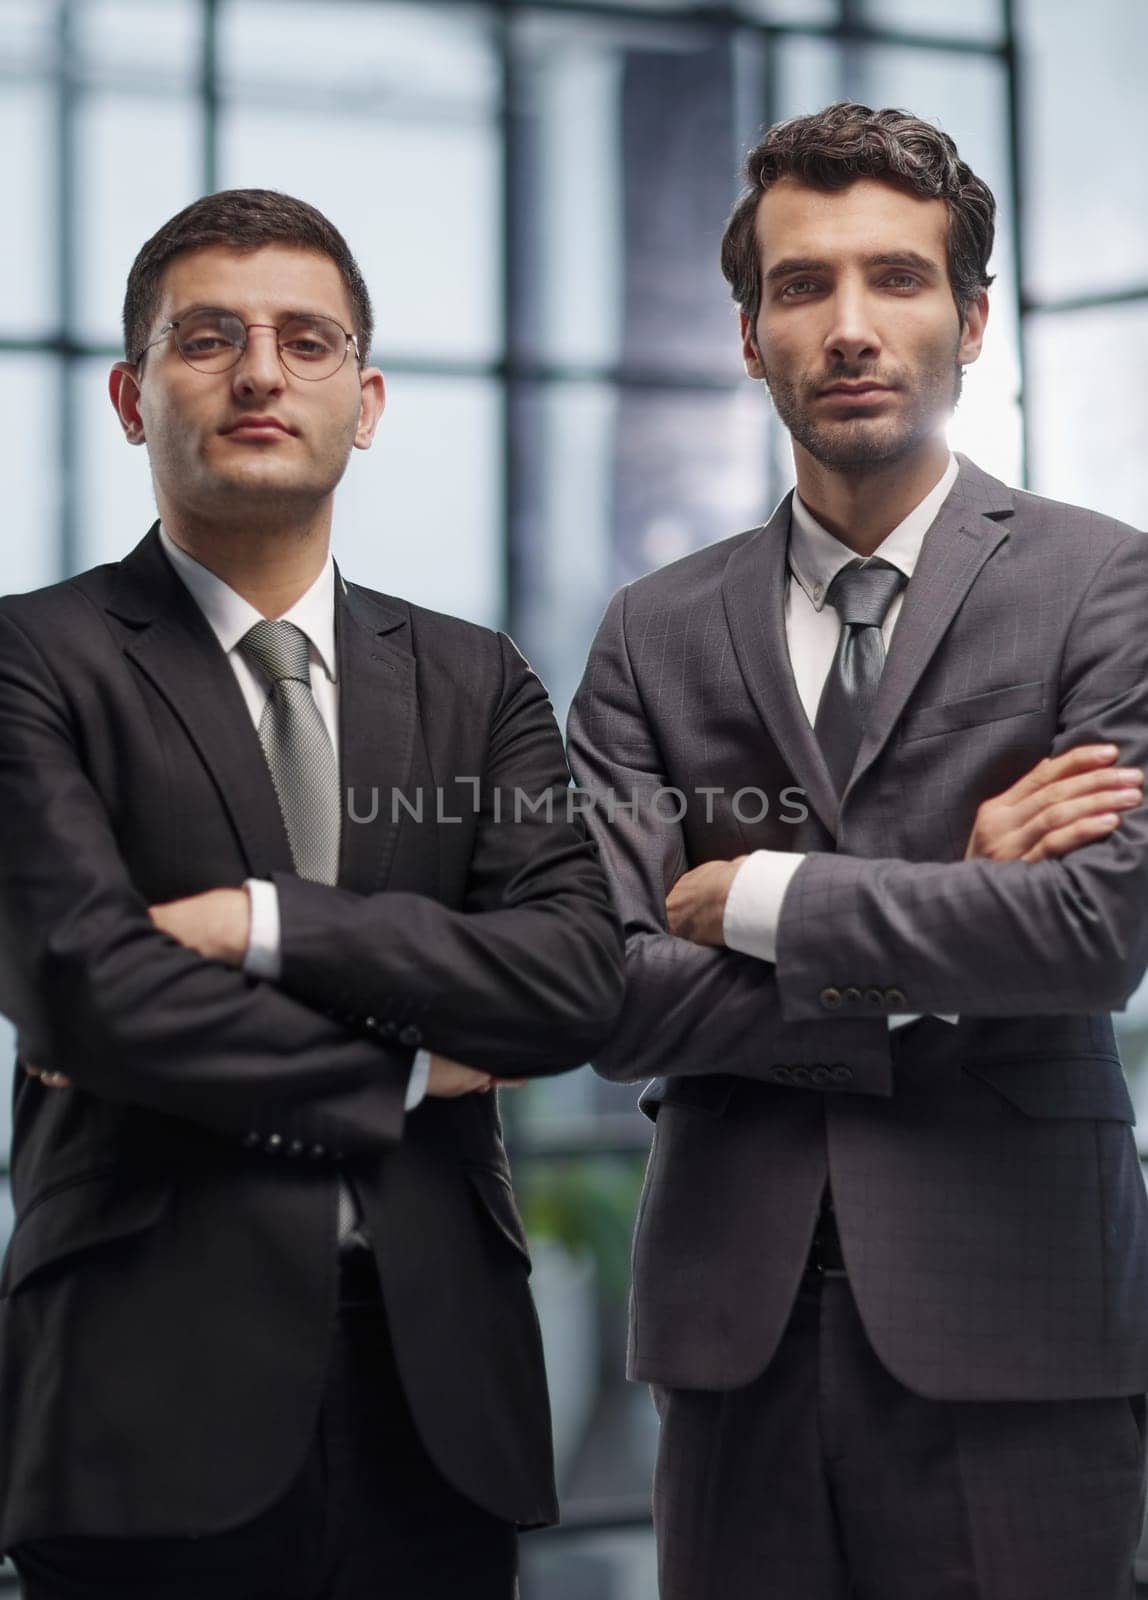 Two men business workers standing with arms crossed gesture at office by Prosto